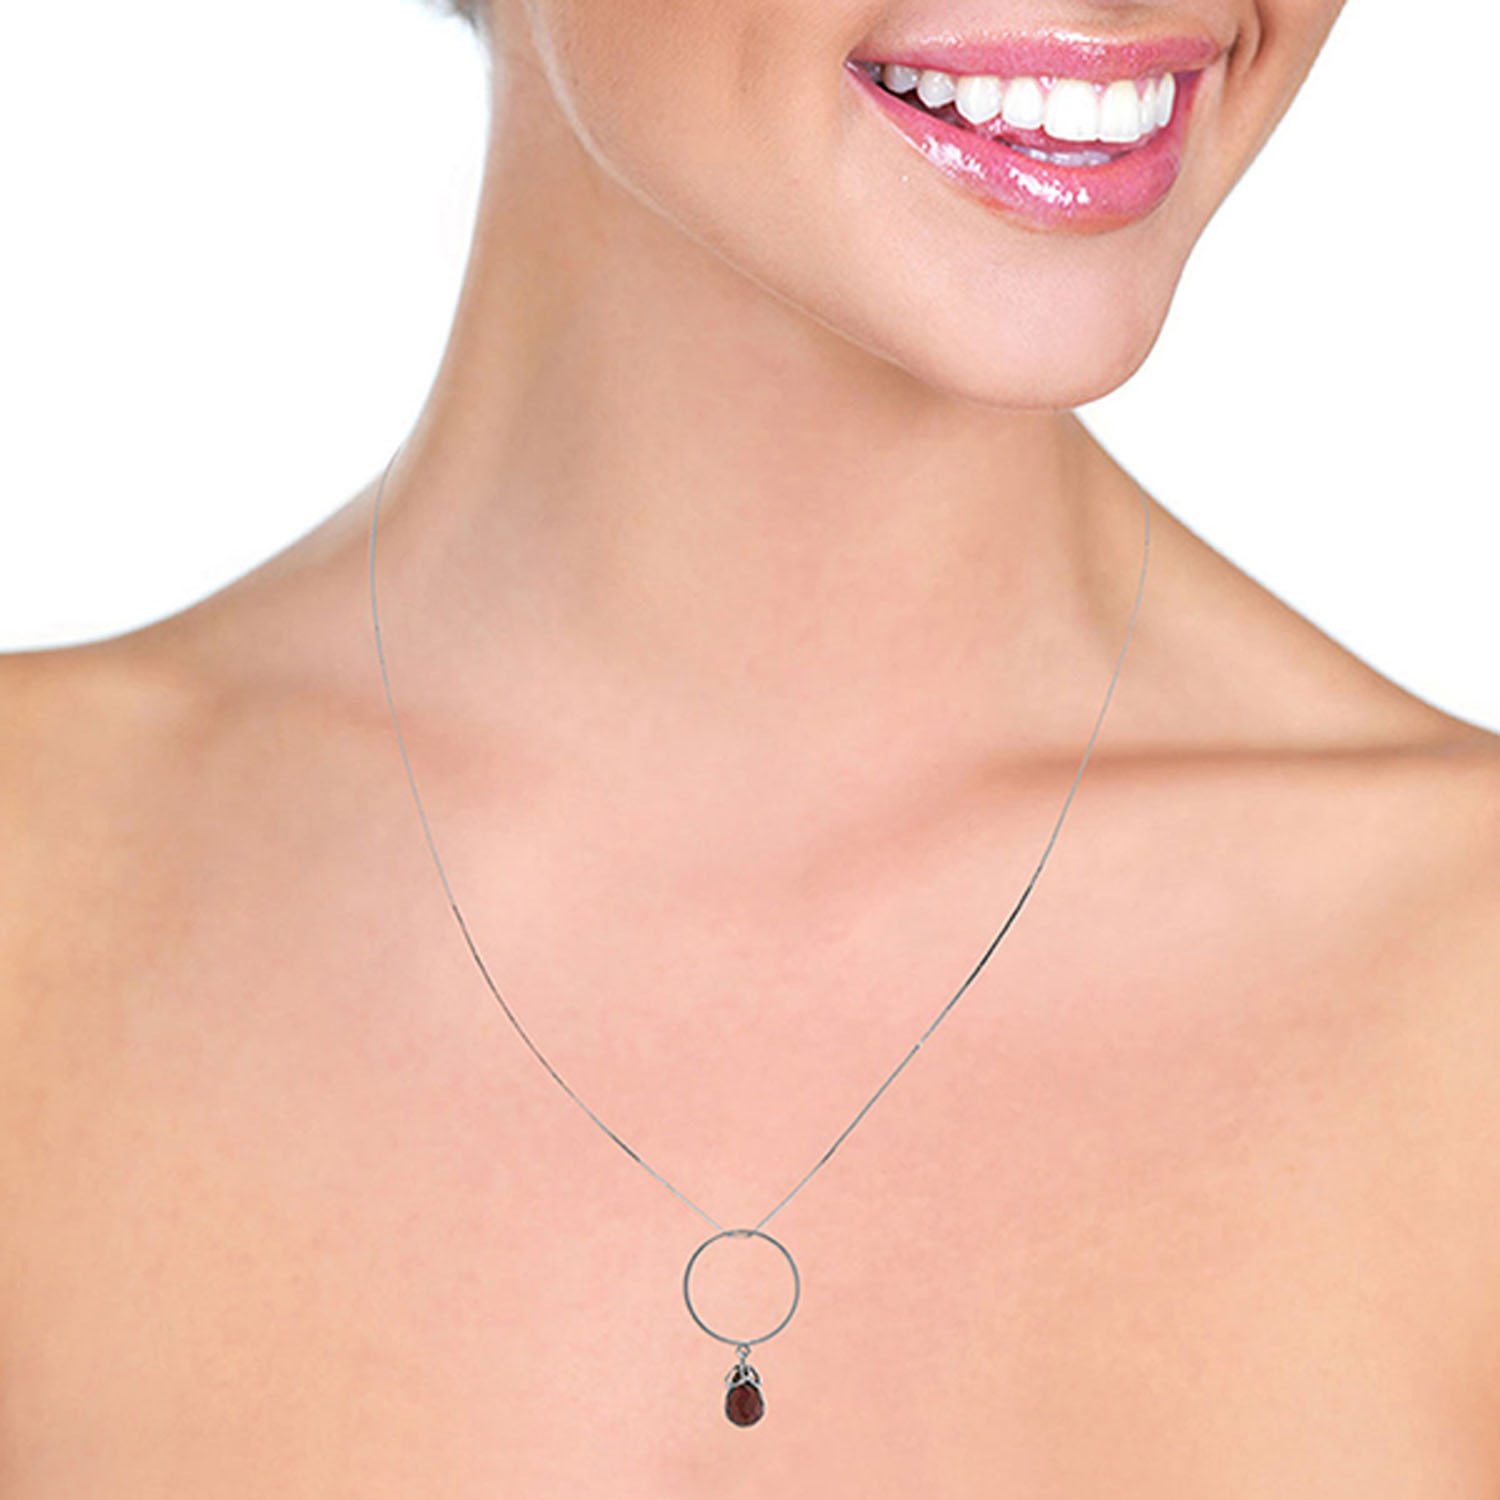 Galaxy Gold 3 Carat 14k 20" Solid White Gold Necklace with Natural Garnet Charm Circle Pendant - image 2 of 2